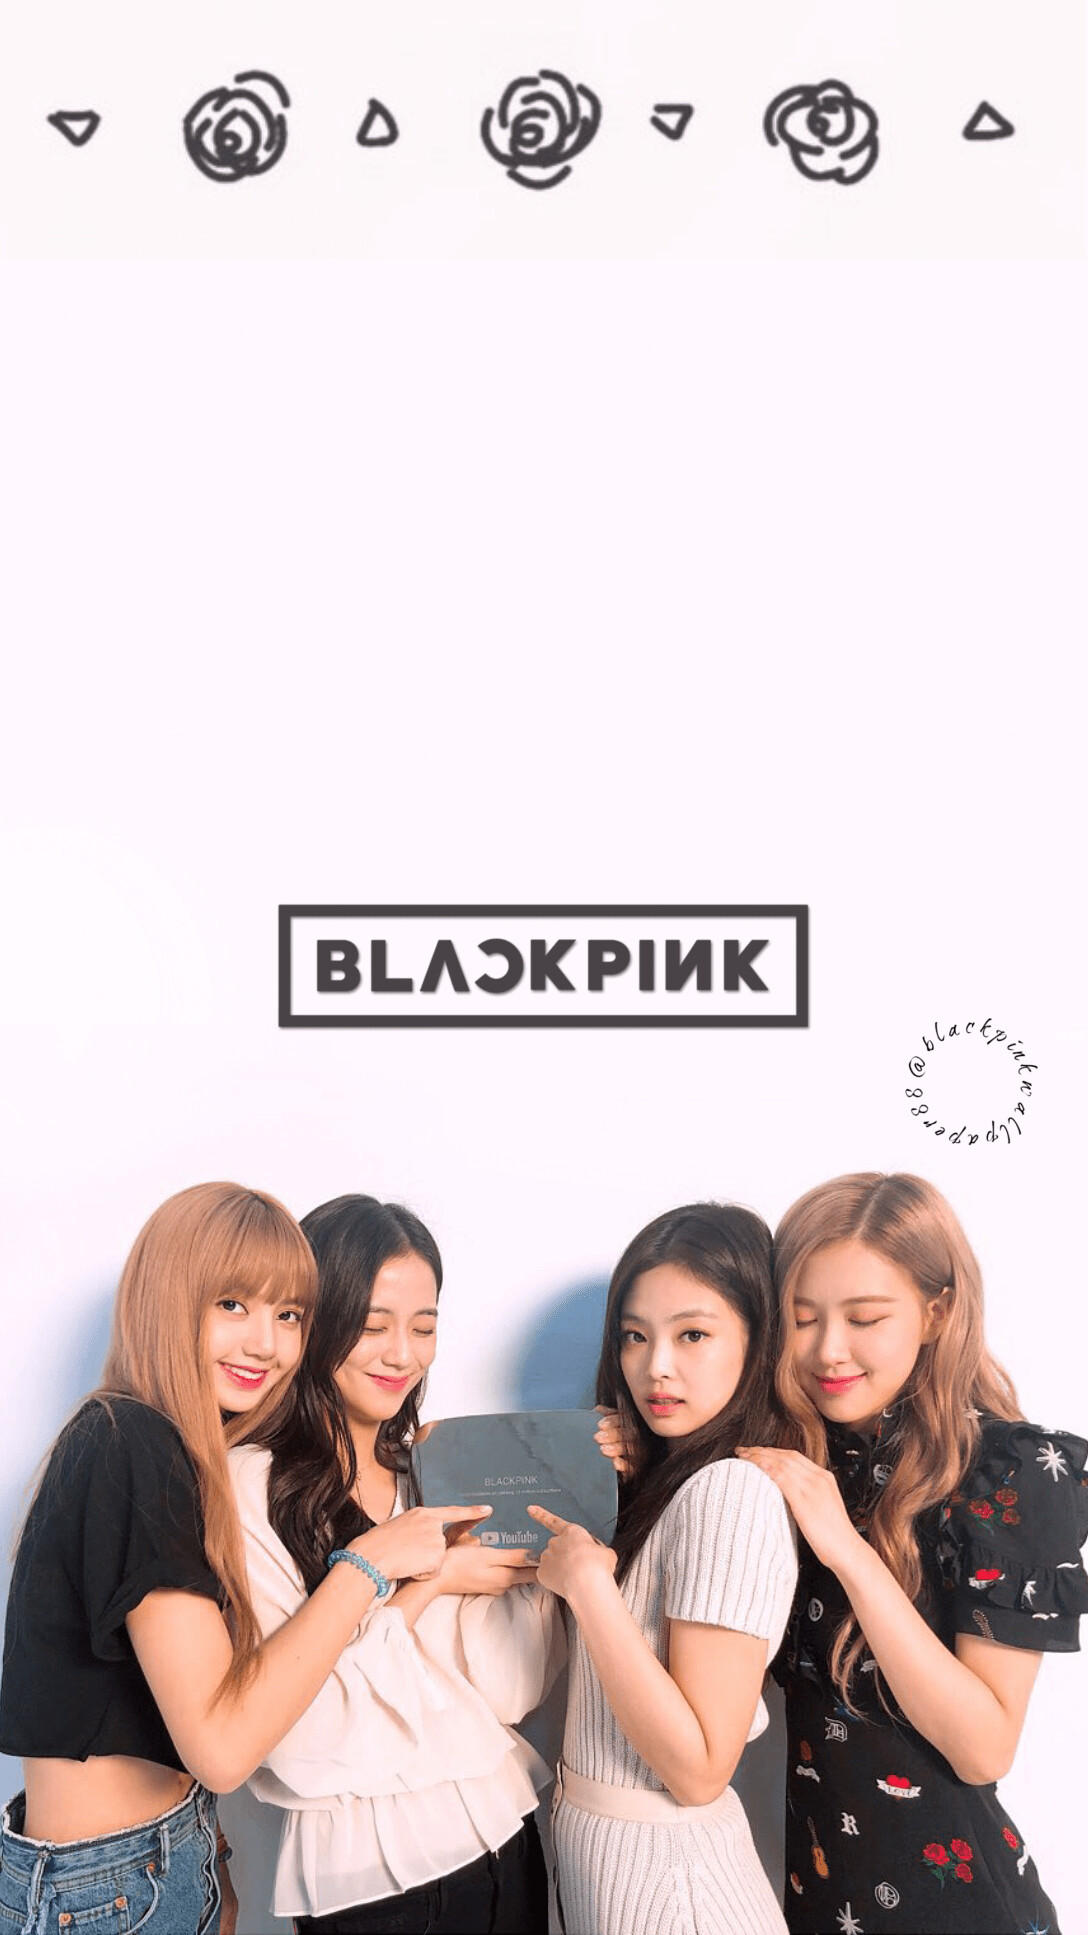 BLACKPINK: The first music group and Korean female act to have five music videos accumulate one billion views each on YouTube. 1090x1940 HD Wallpaper.